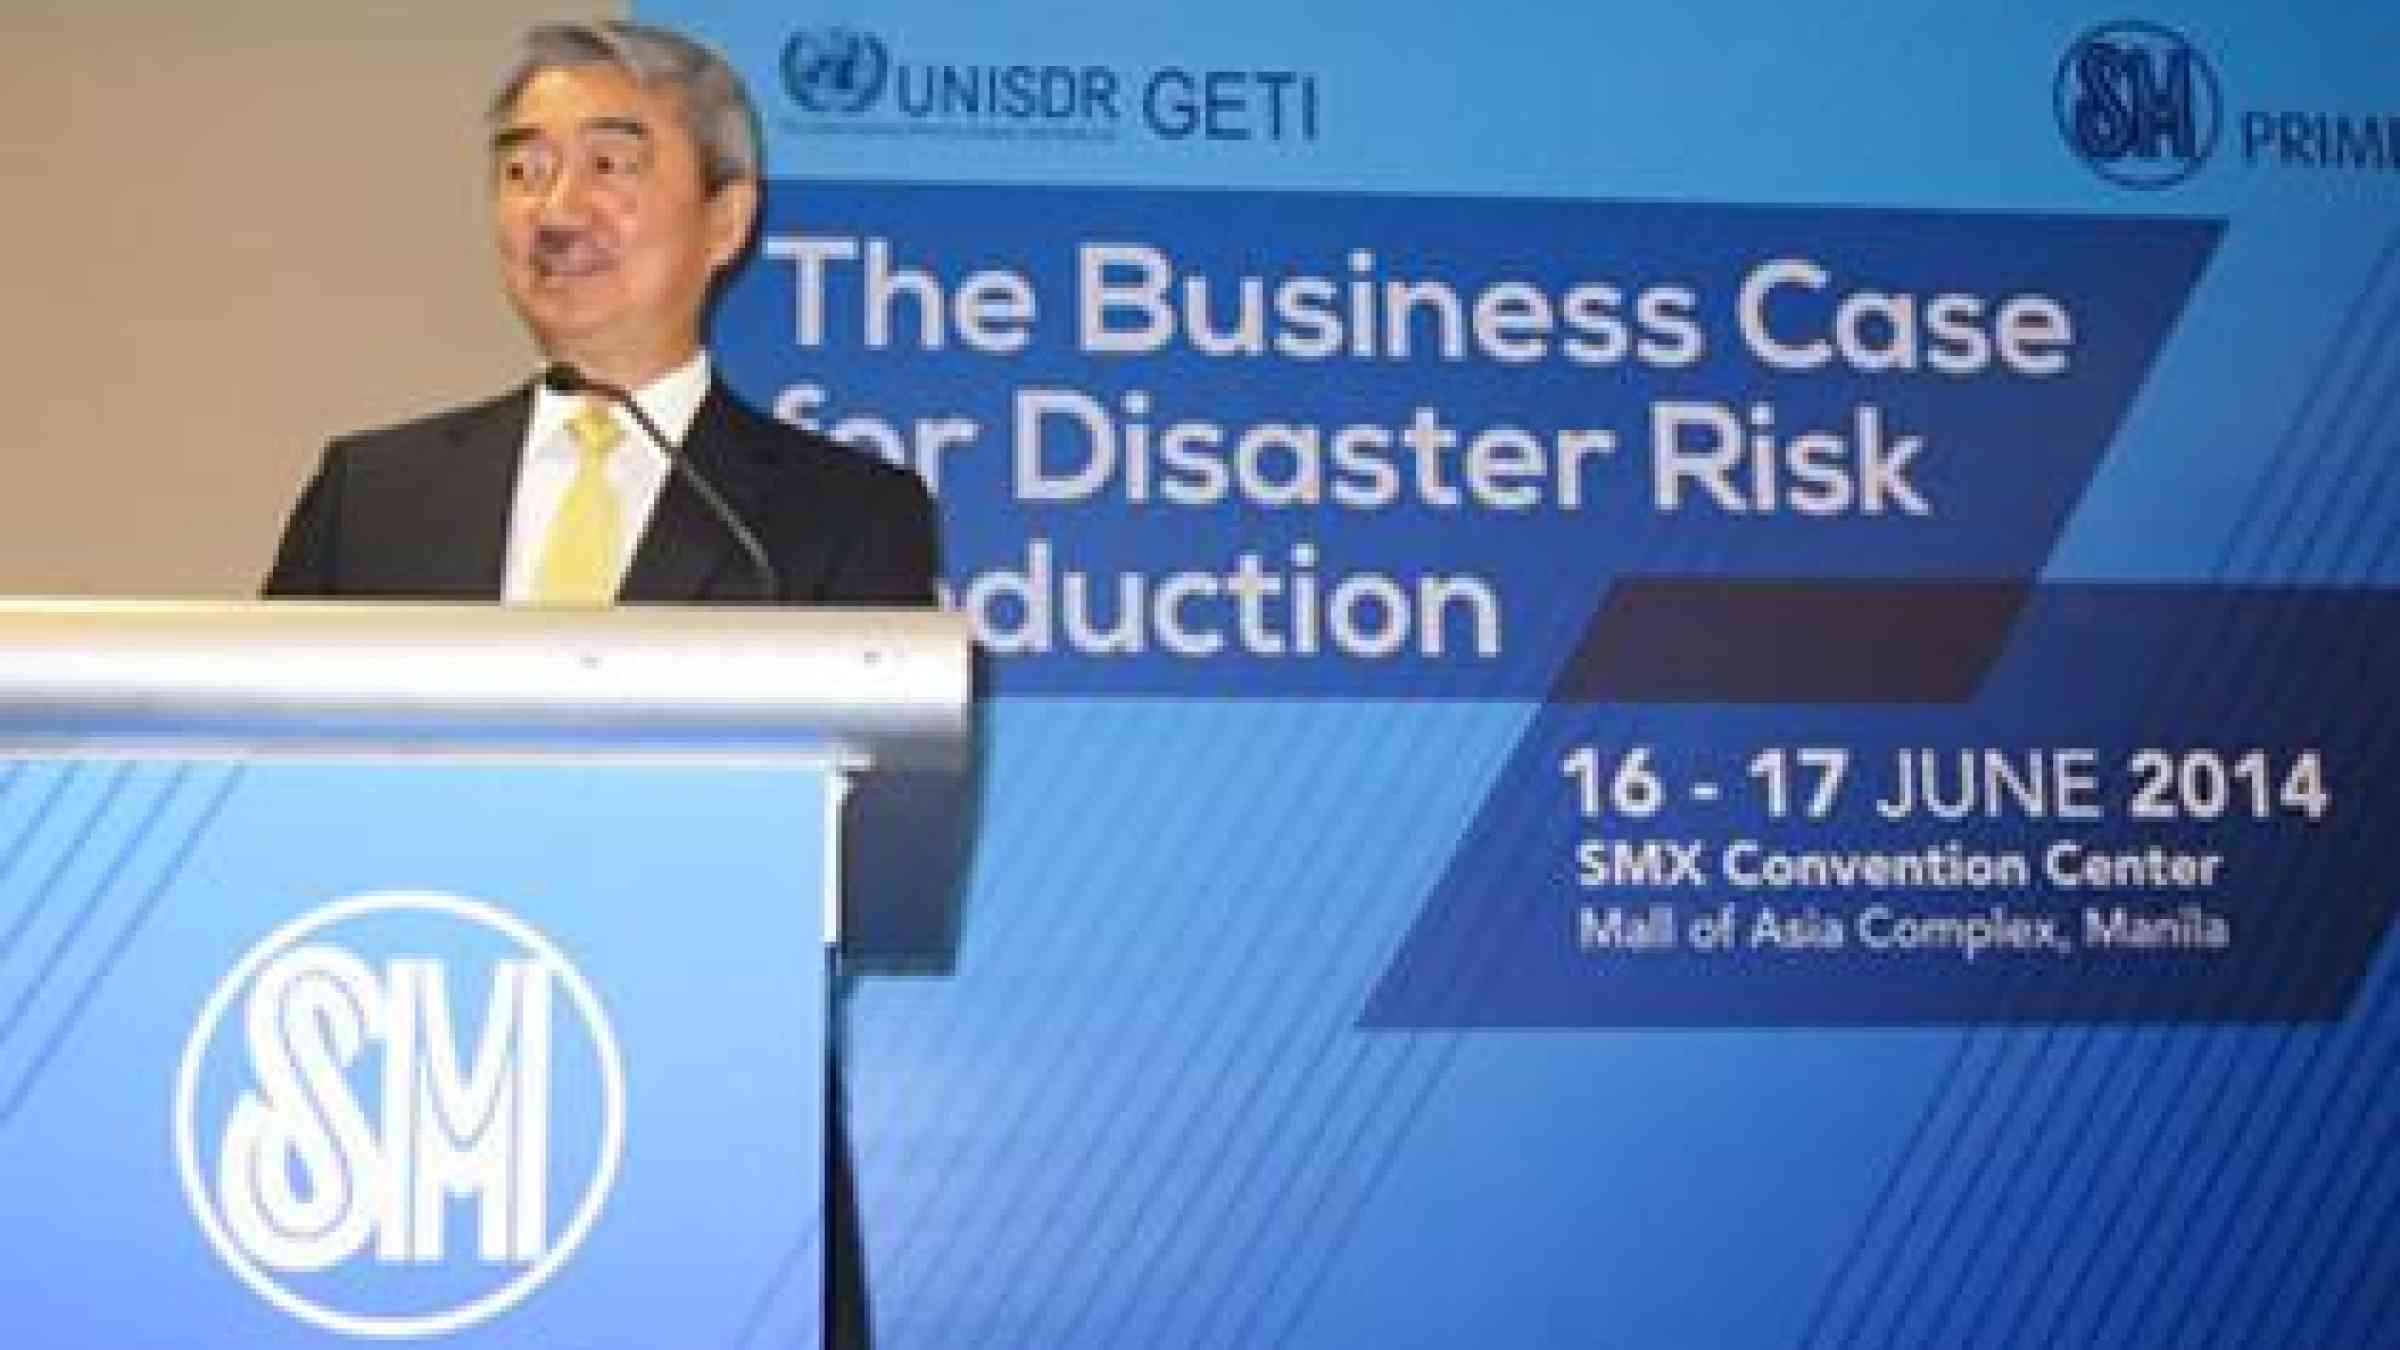 Hans Sy: ‘We need to convince business of the opportunity to create value in markets with products that address disaster risk.’ (Photo: UNISDR)